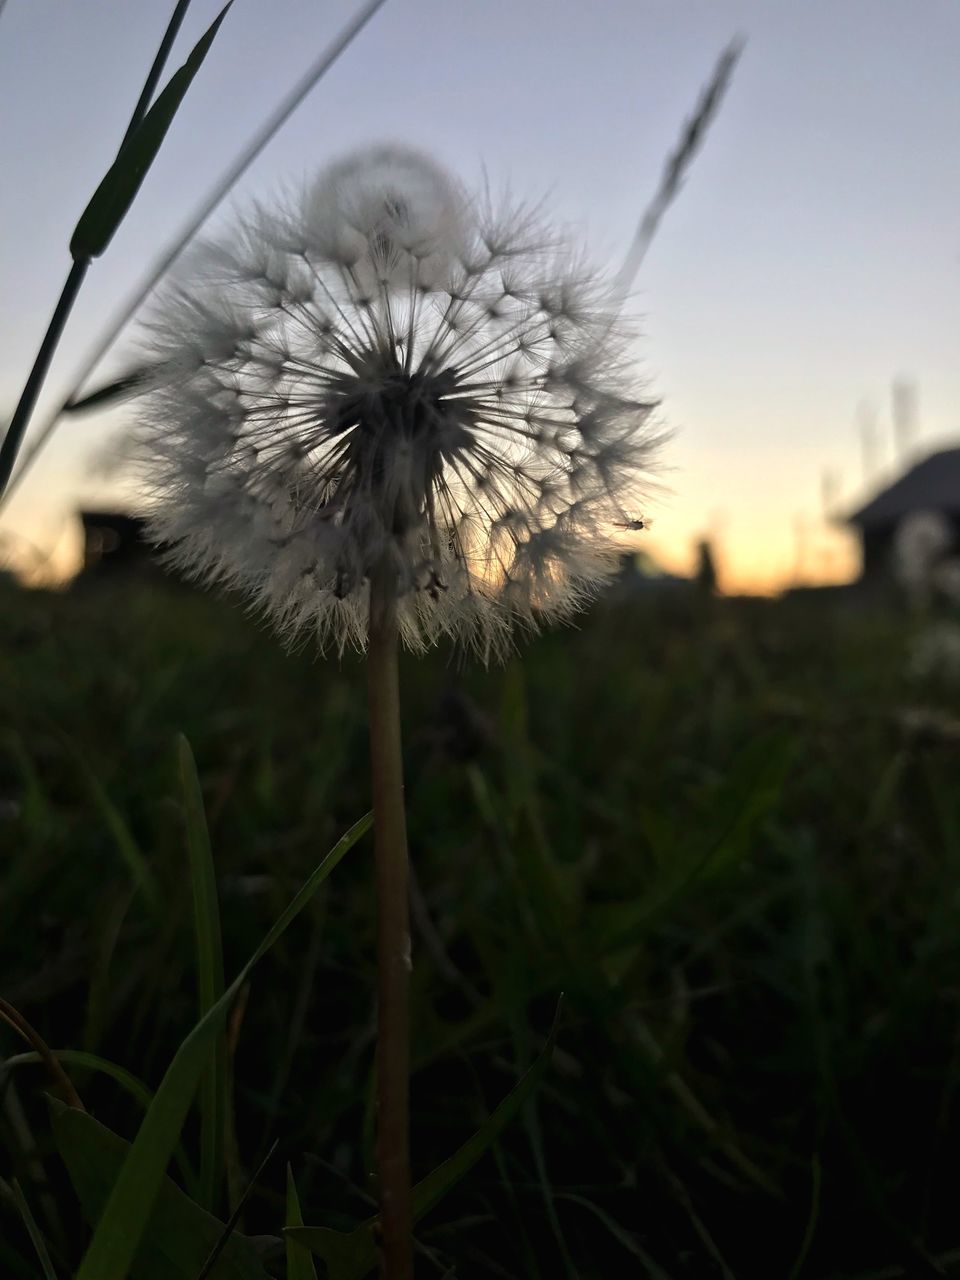 plant, flower, fragility, flowering plant, vulnerability, dandelion, growth, freshness, close-up, beauty in nature, flower head, inflorescence, nature, field, focus on foreground, sky, land, no people, petal, dandelion seed, softness, outdoors